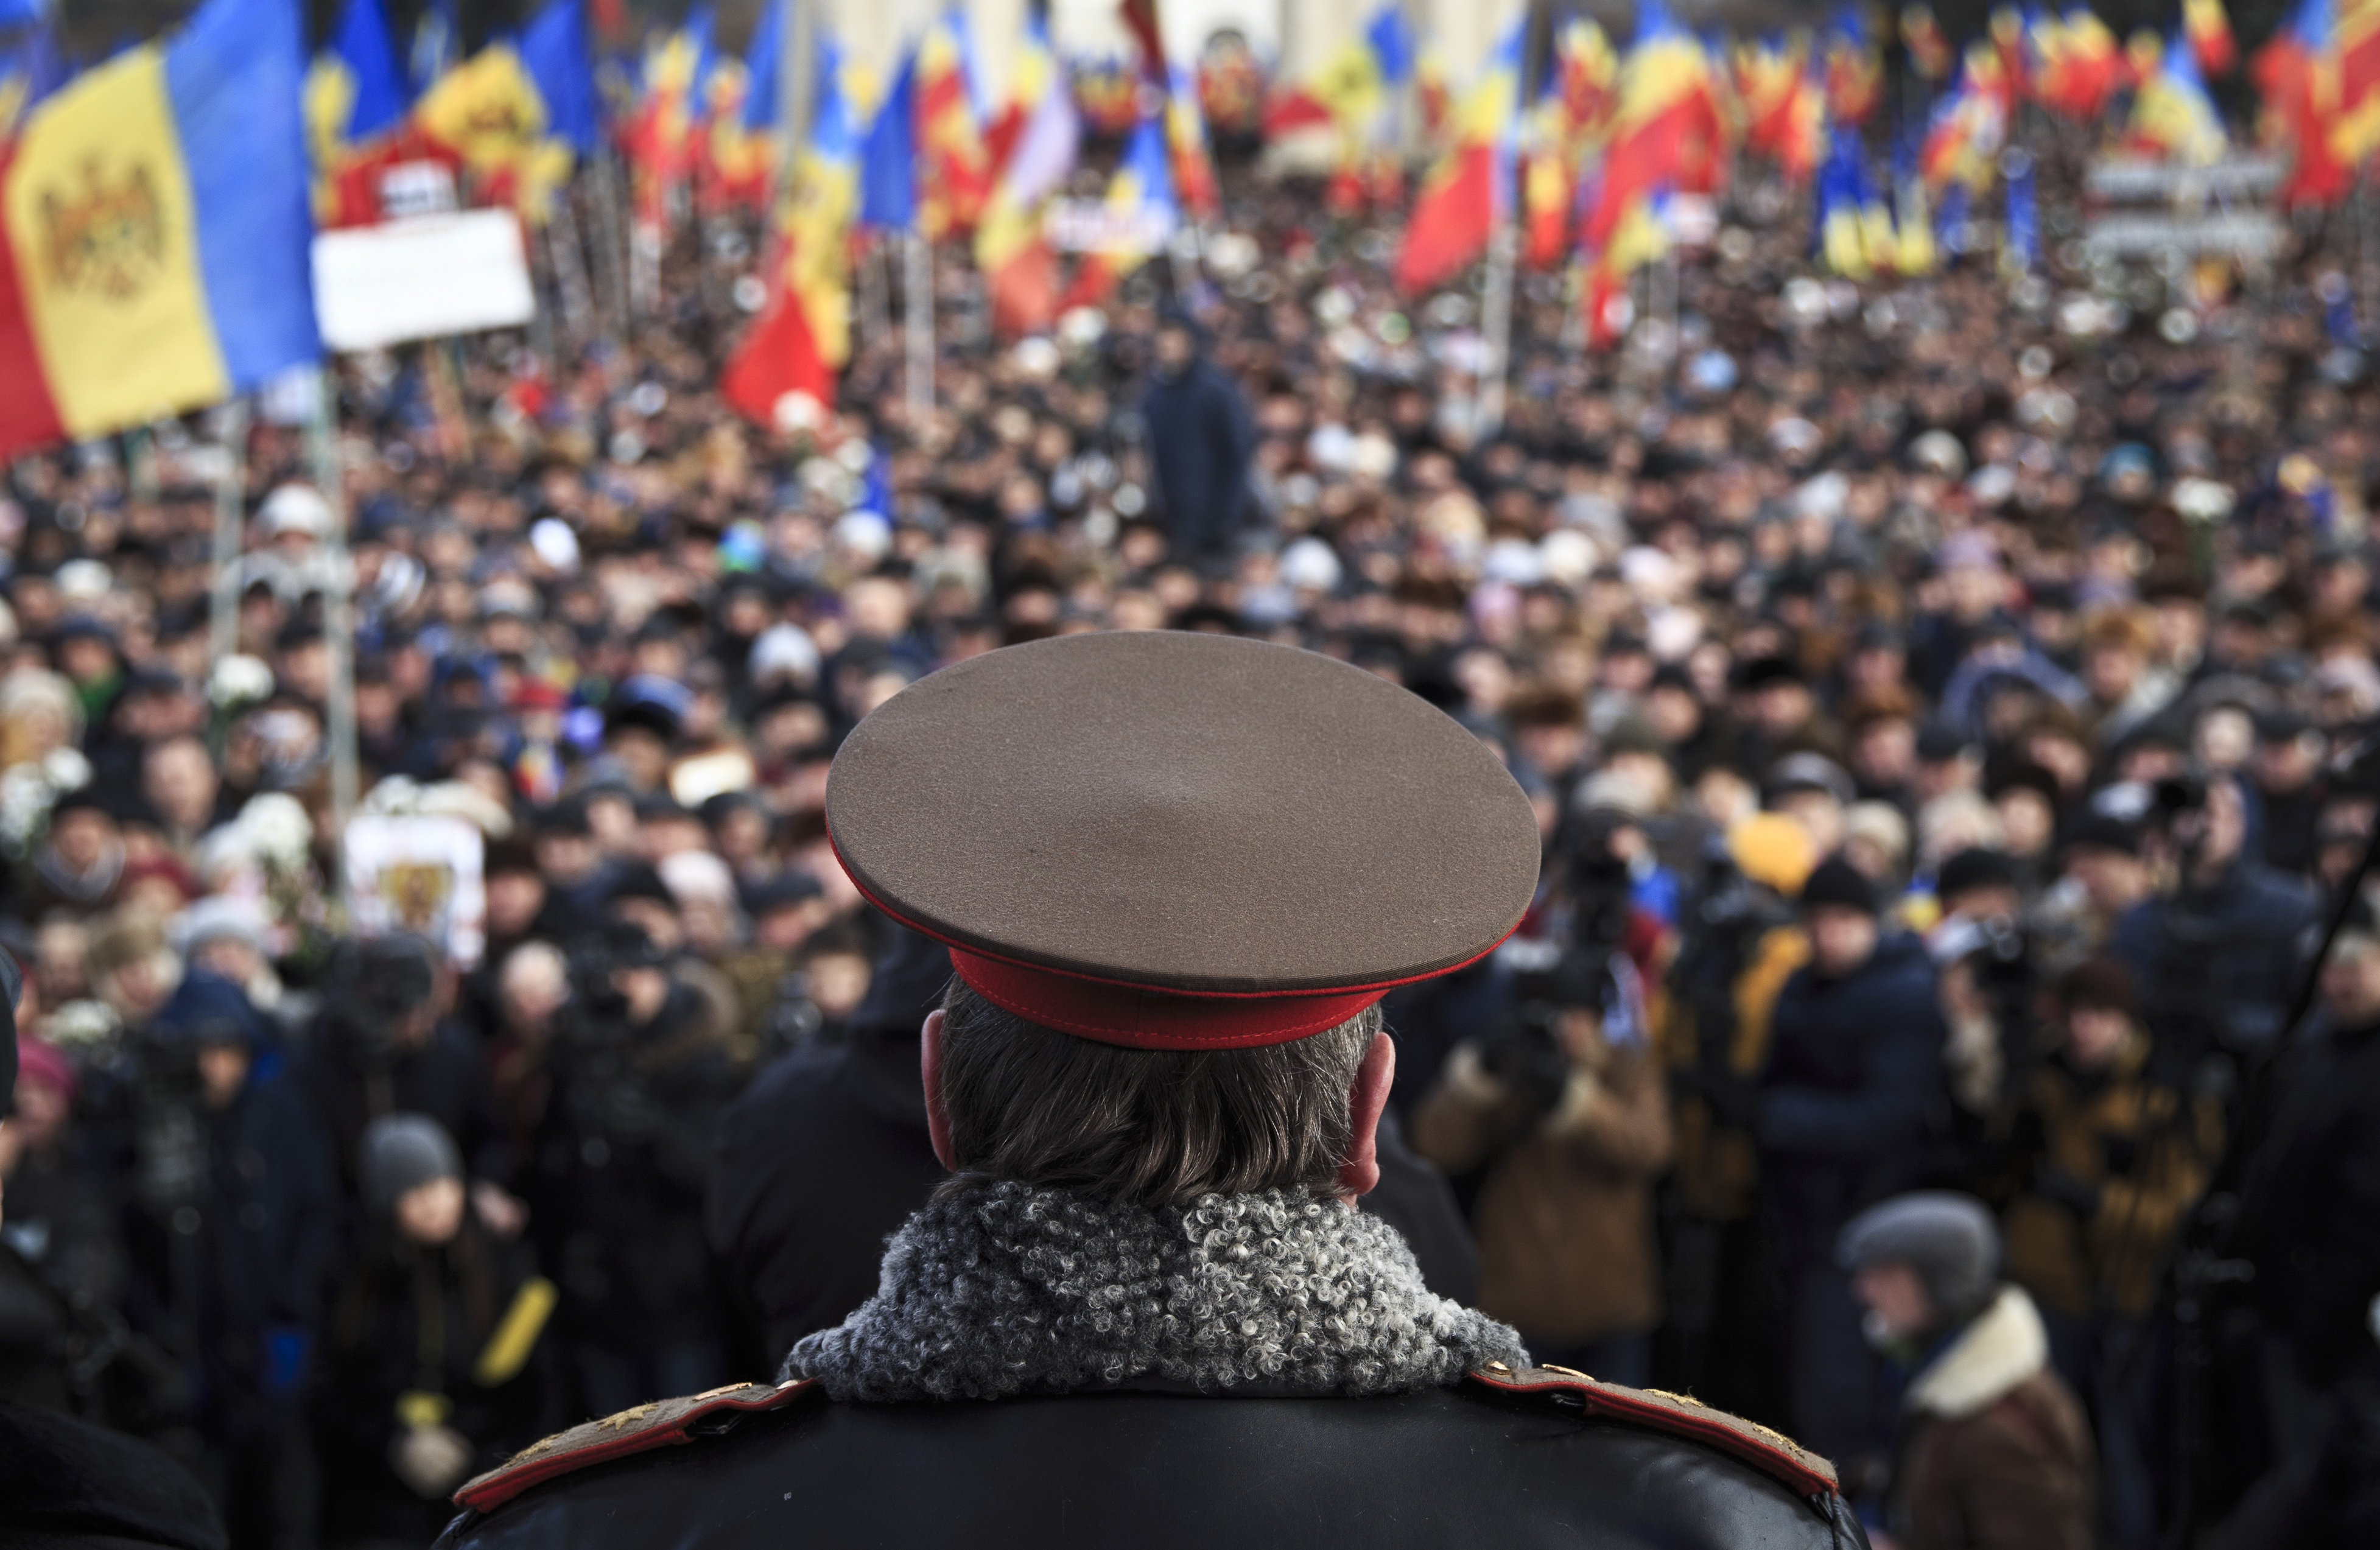 A Moldovan army general watches demonstrators during a large protest in Chisinau, Moldova, Sunday, Jan. 24, 2016